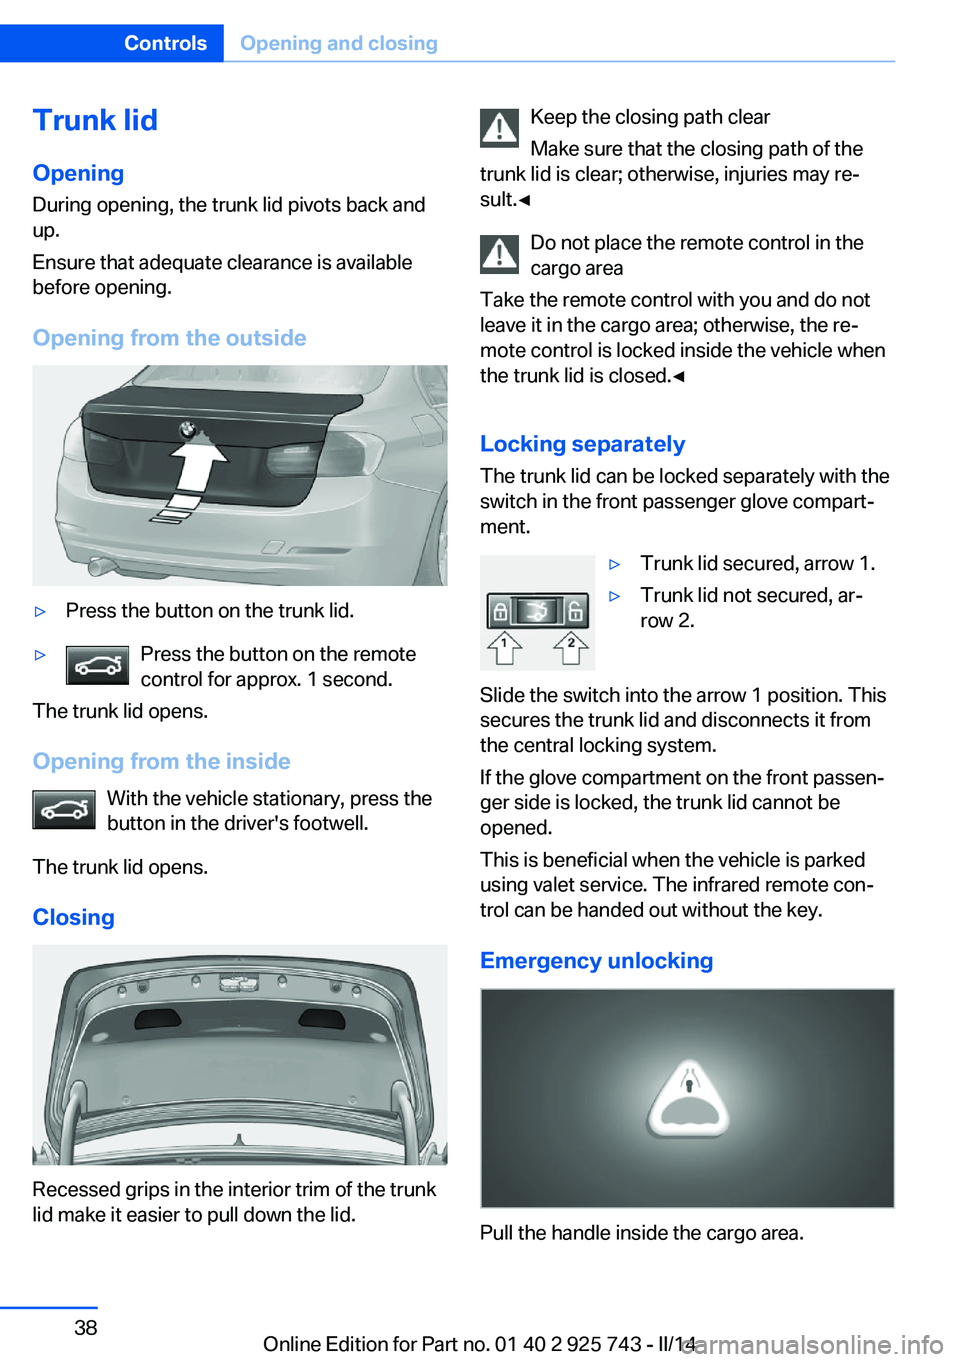 BMW 328D 2014 Owners Guide Trunk lidOpening
During opening, the trunk lid pivots back and
up.
Ensure that adequate clearance is available
before opening.
Opening from the outside▷Press the button on the trunk lid.▷Press the